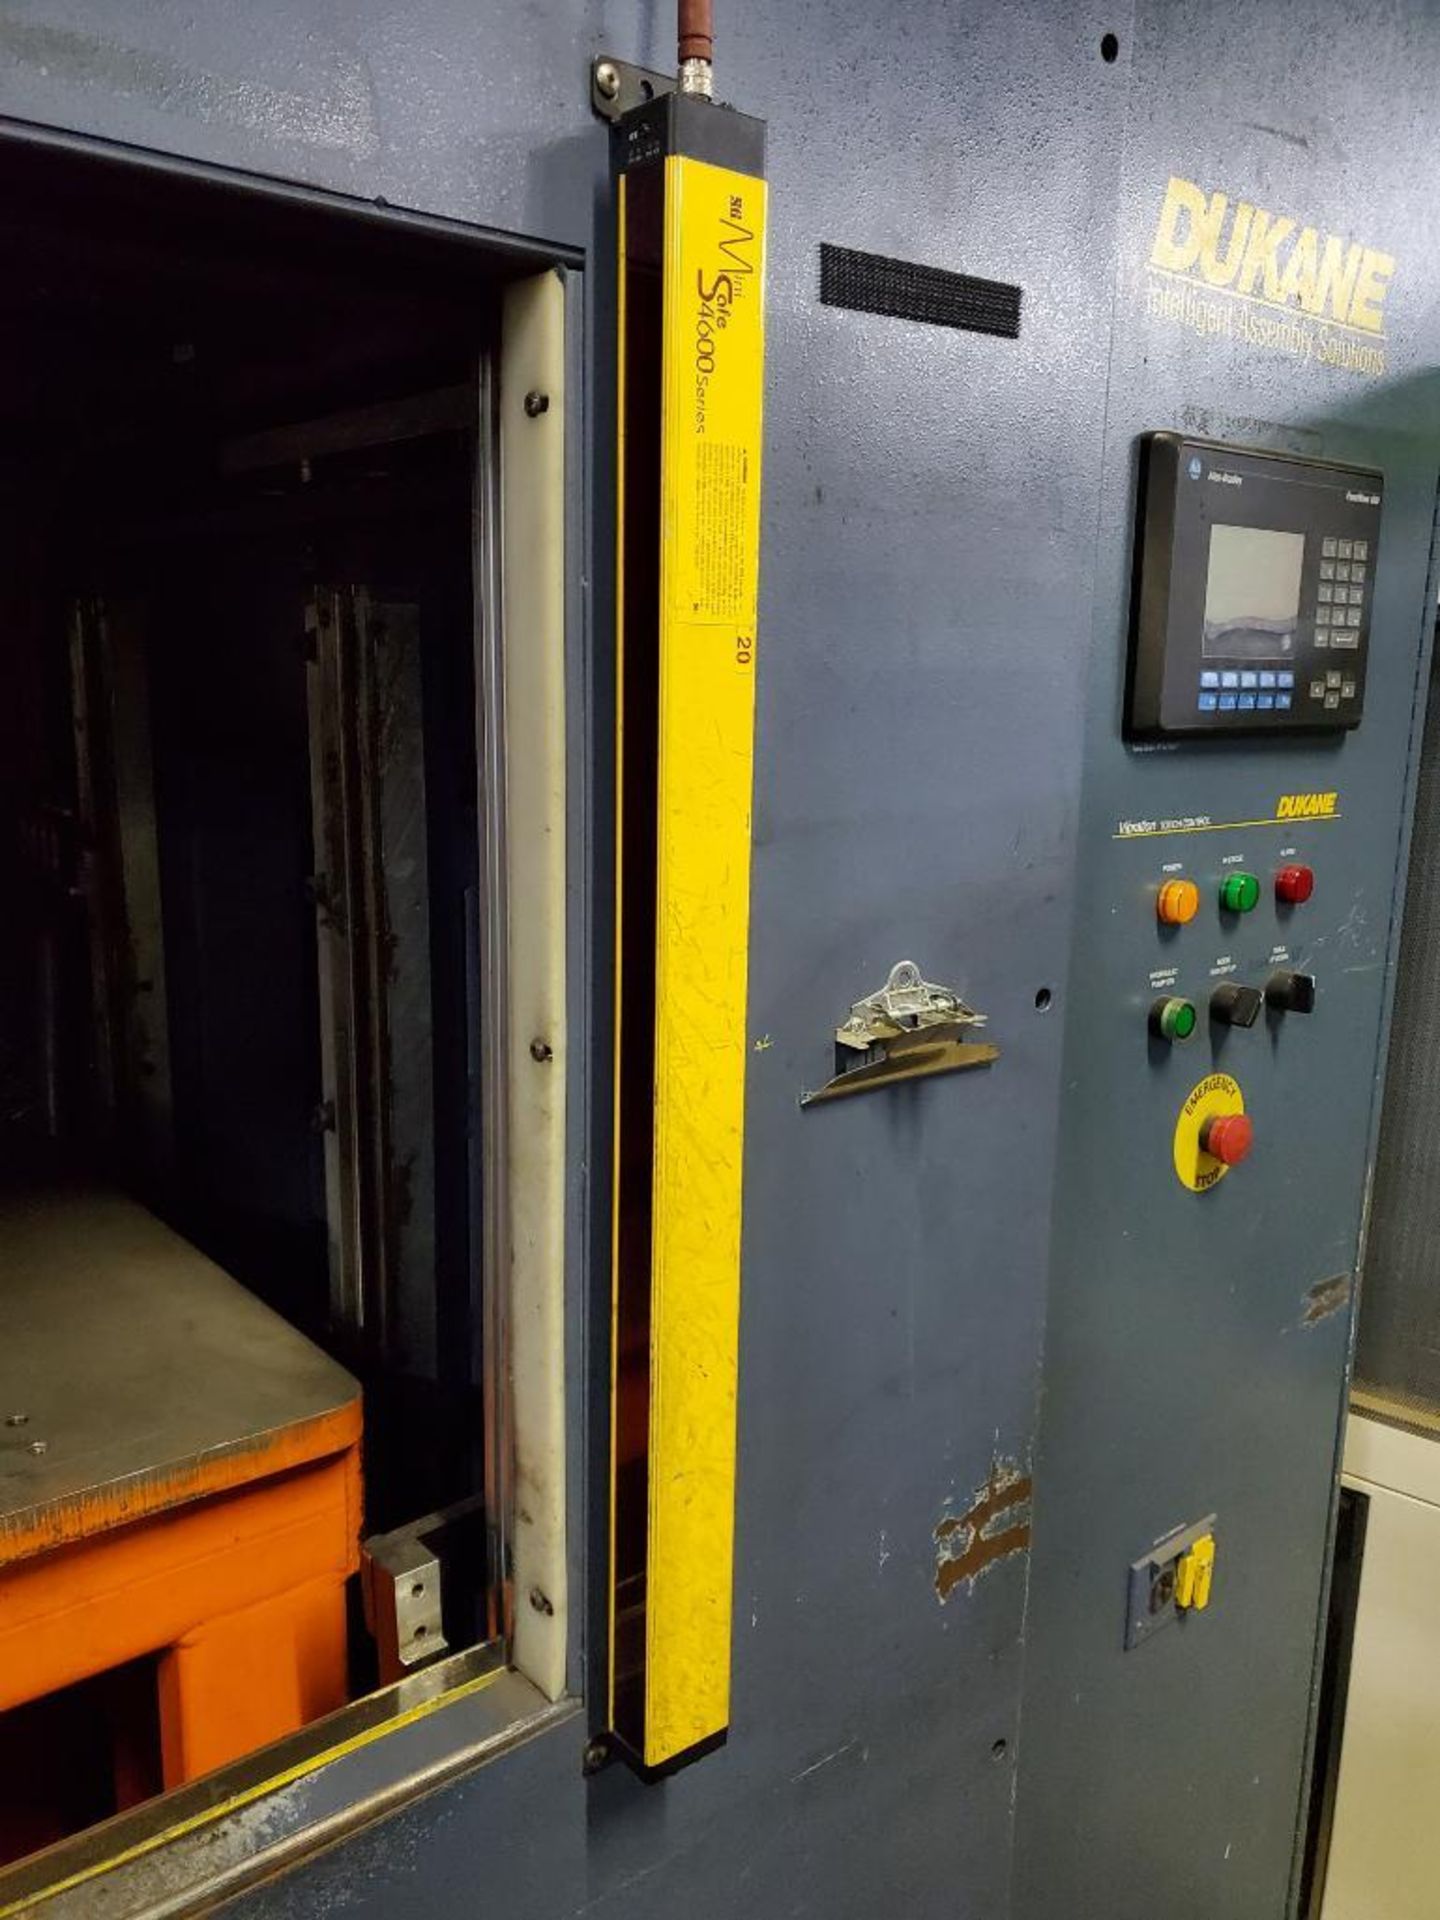 2004 Dukane VWB3700 Hydraulic Assembly Press, S/N US-197089, AB PanelView 600 DRO, Vibration Touch C - Image 9 of 11